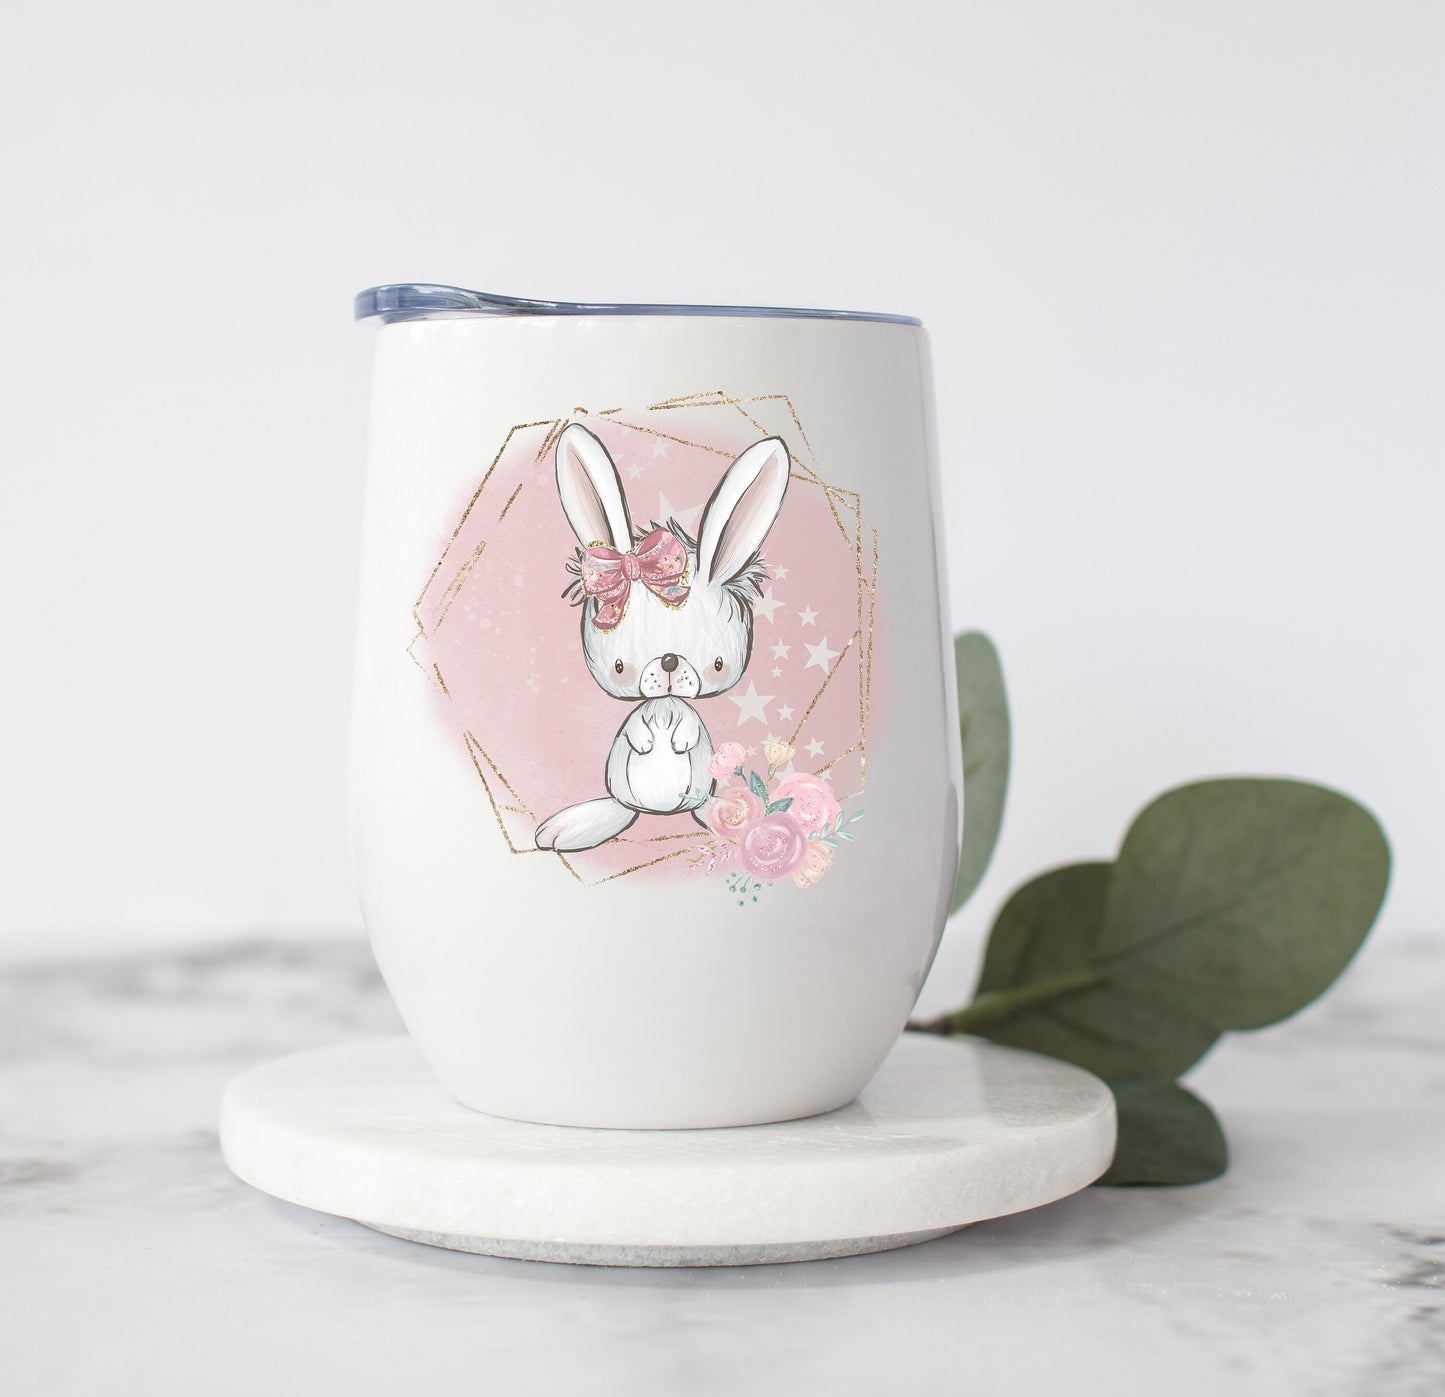 Easter Bunny Sublimation Design PNG, Greenery toddler Sublimation Design Downloads, Easter Rabbit Design for kids, Baby Sublimation design